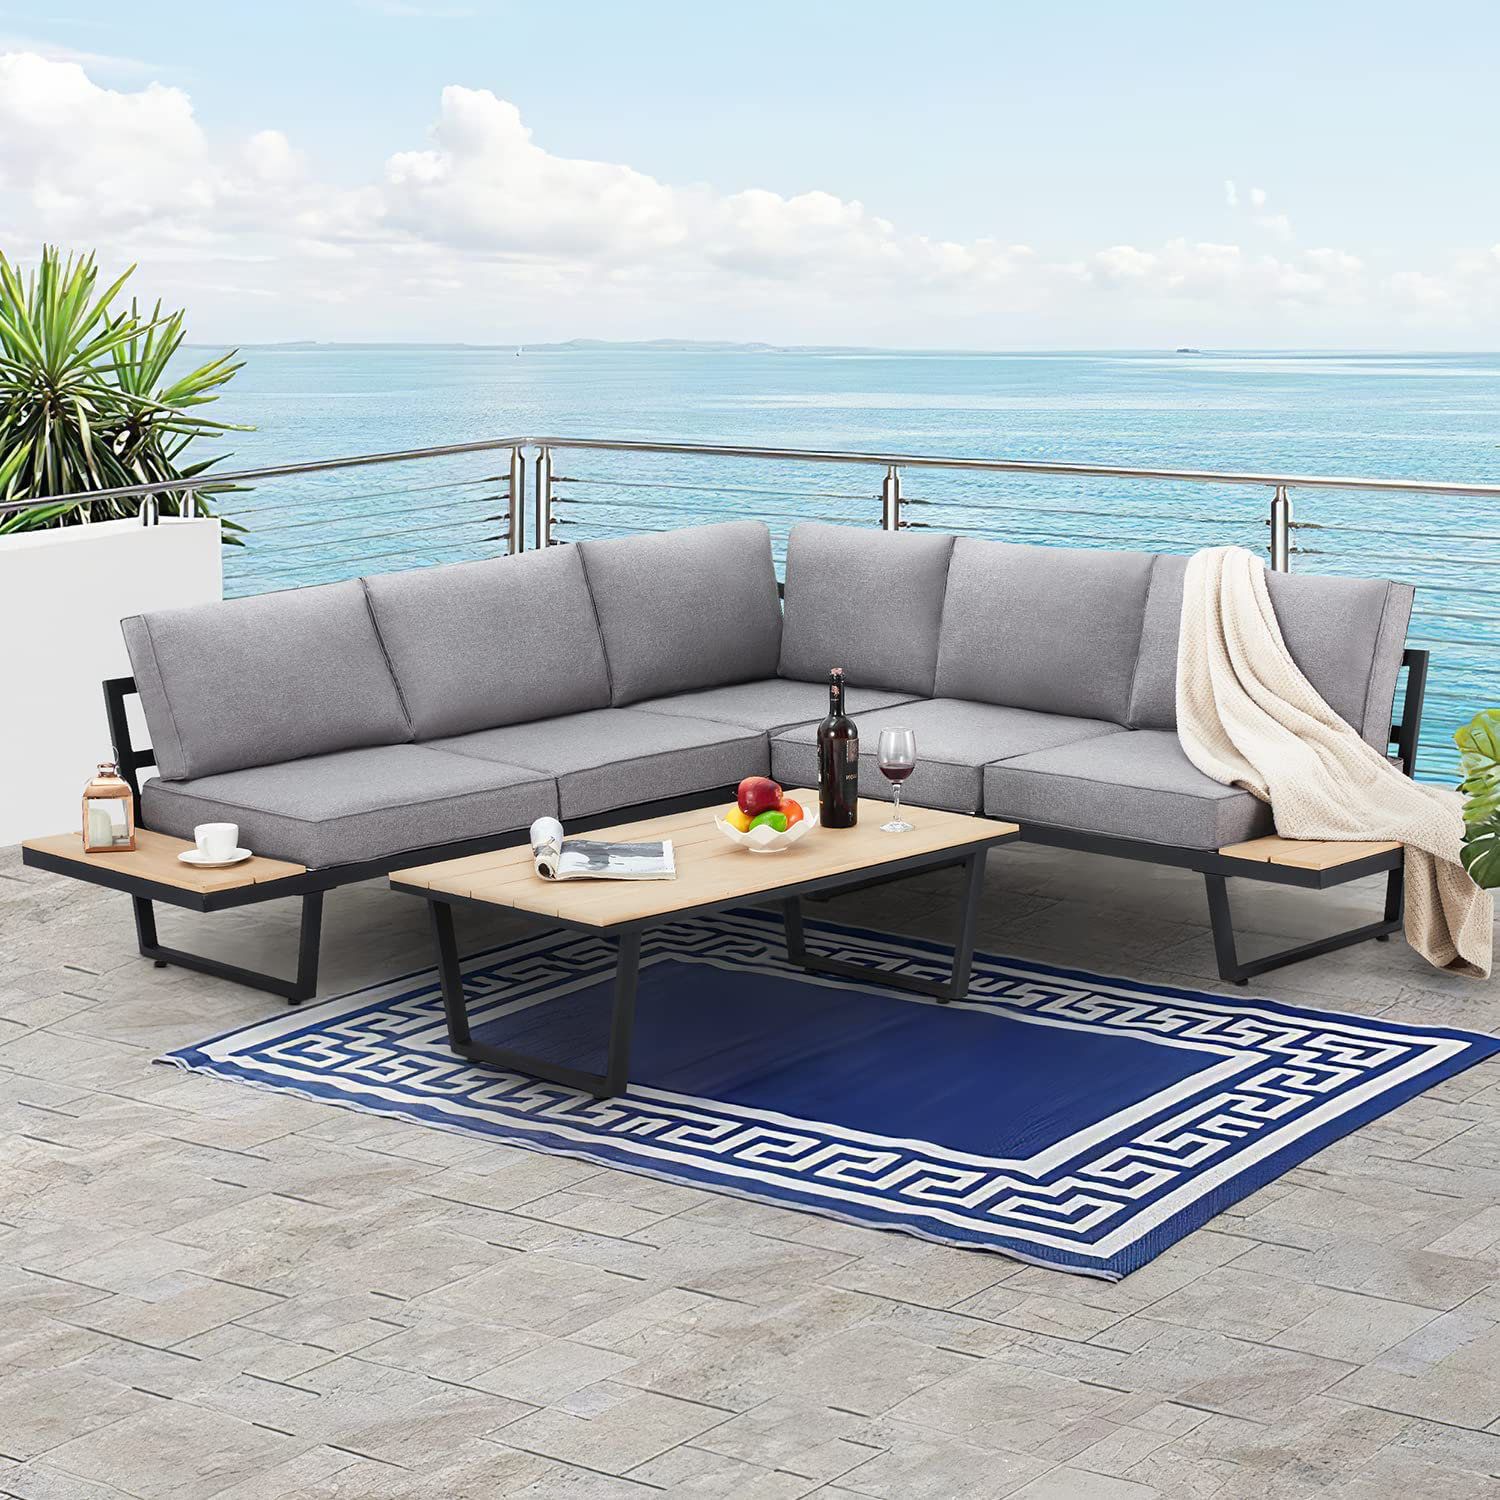 Latitude Run® 5 – Person Outdoor Seating Group With Cushions | Wayfair With Regard To Side Table Iron Frame Patio Furniture Set (View 3 of 15)